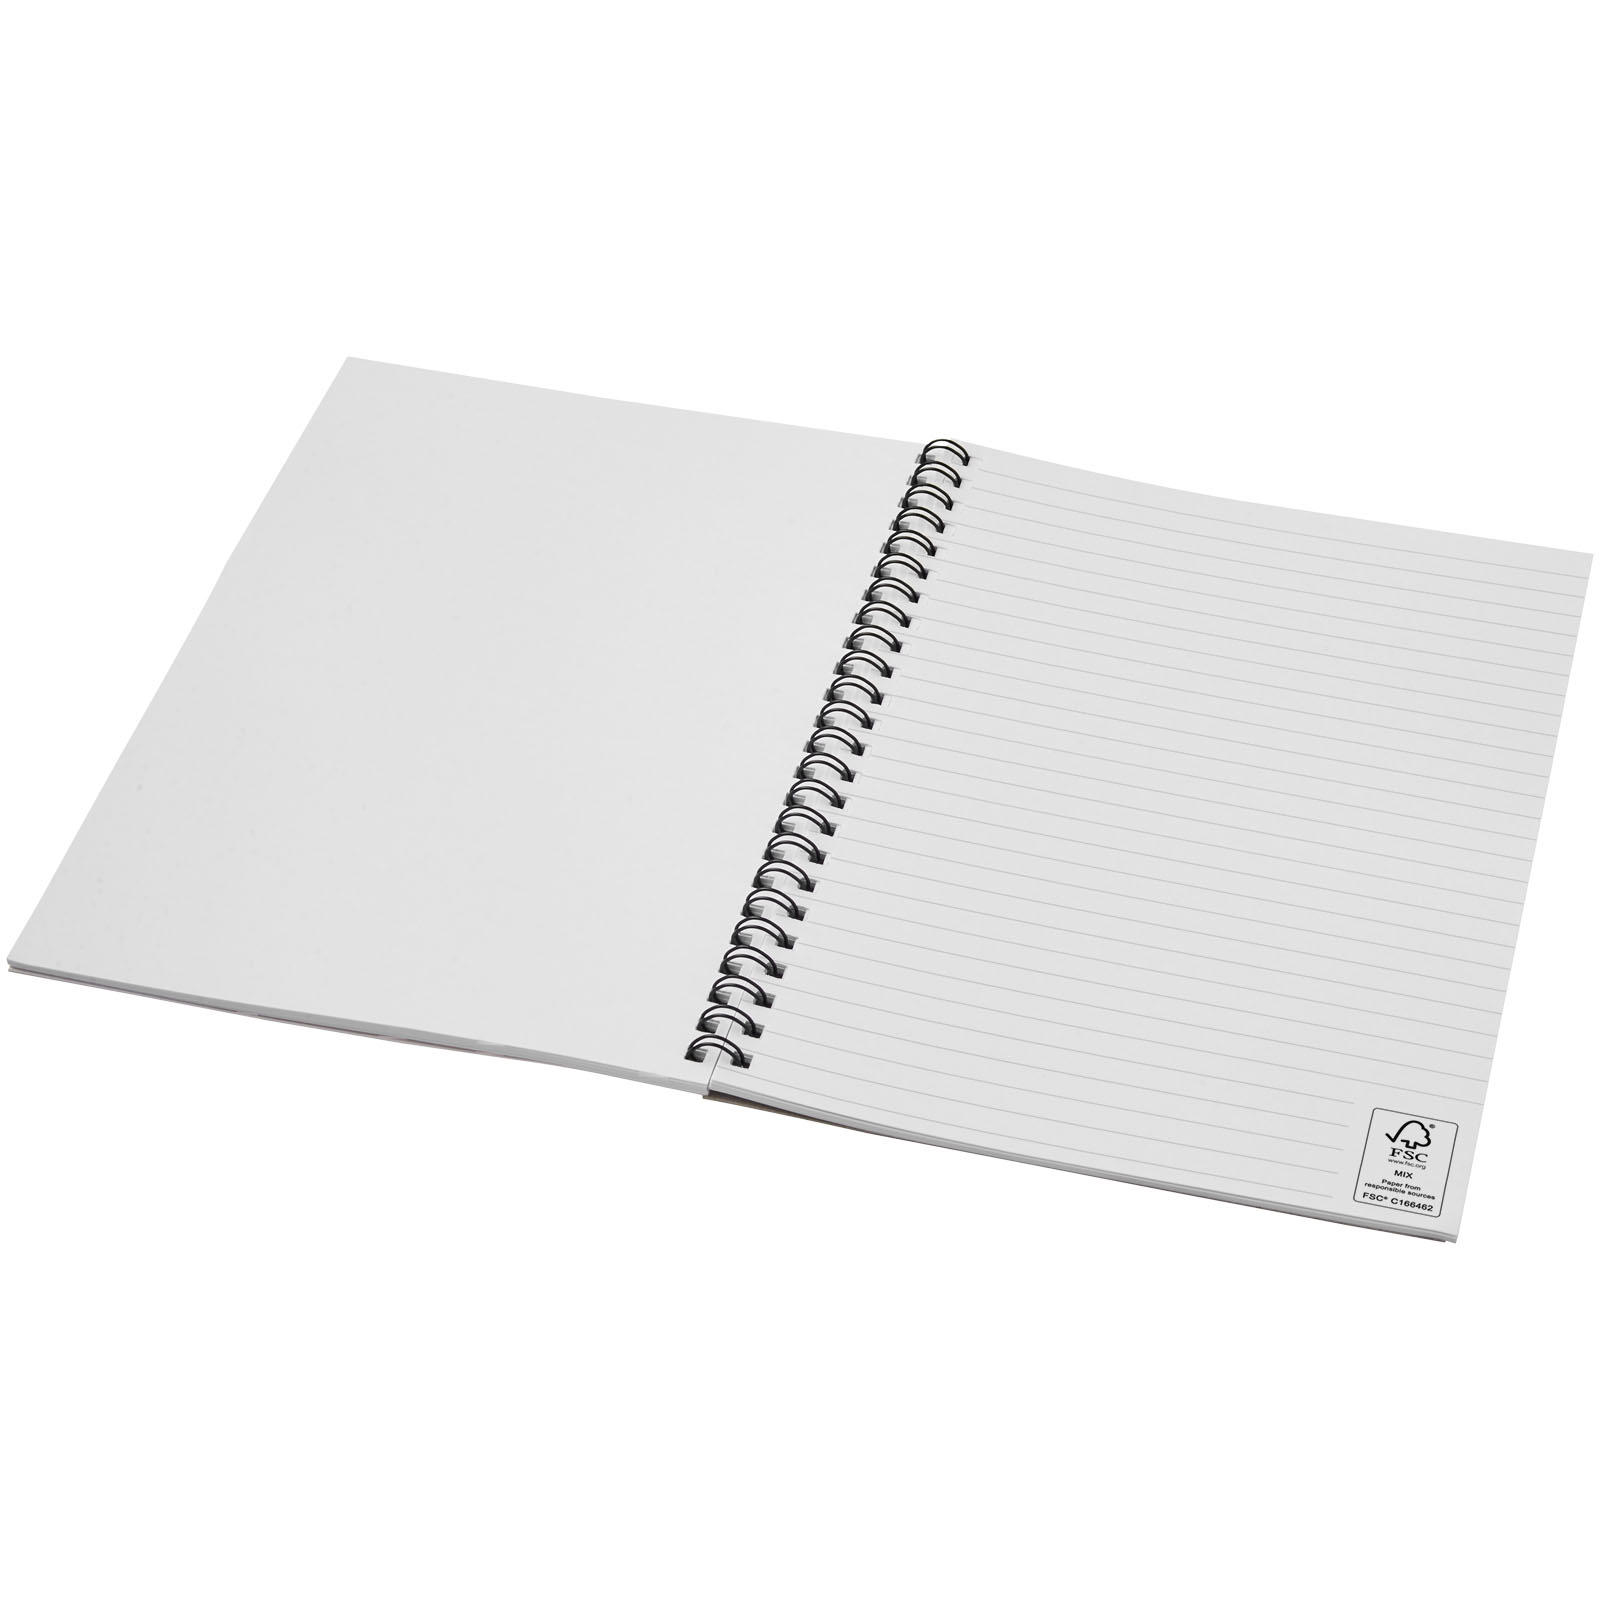 Advertising Soft cover notebooks - Desk-Mate® A5 colour spiral notebook - 2